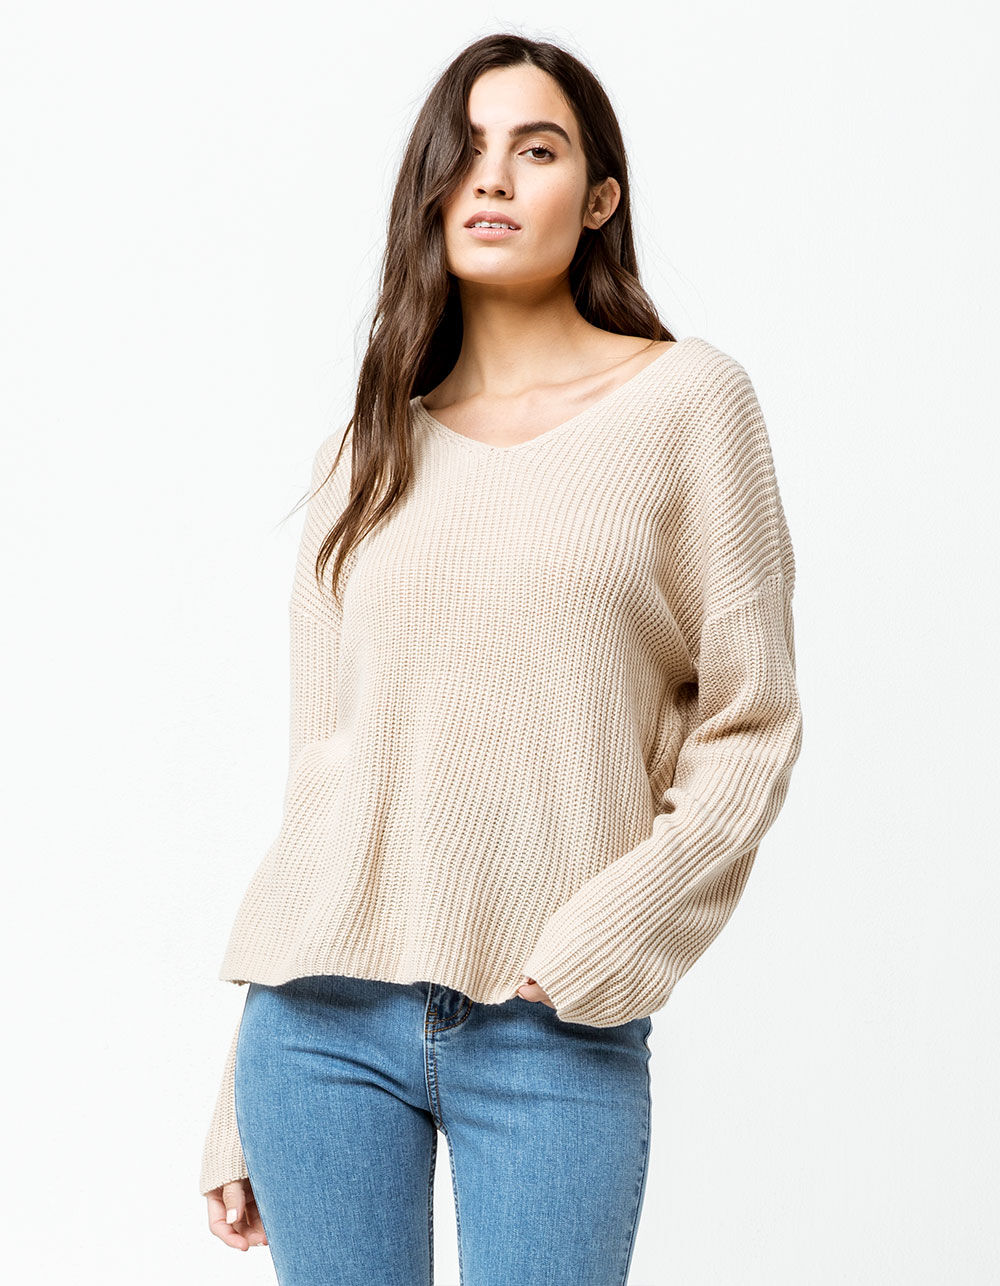 SKY AND SPARROW V-Neck Twist Back Tan Womens Sweater - TAN | Tillys